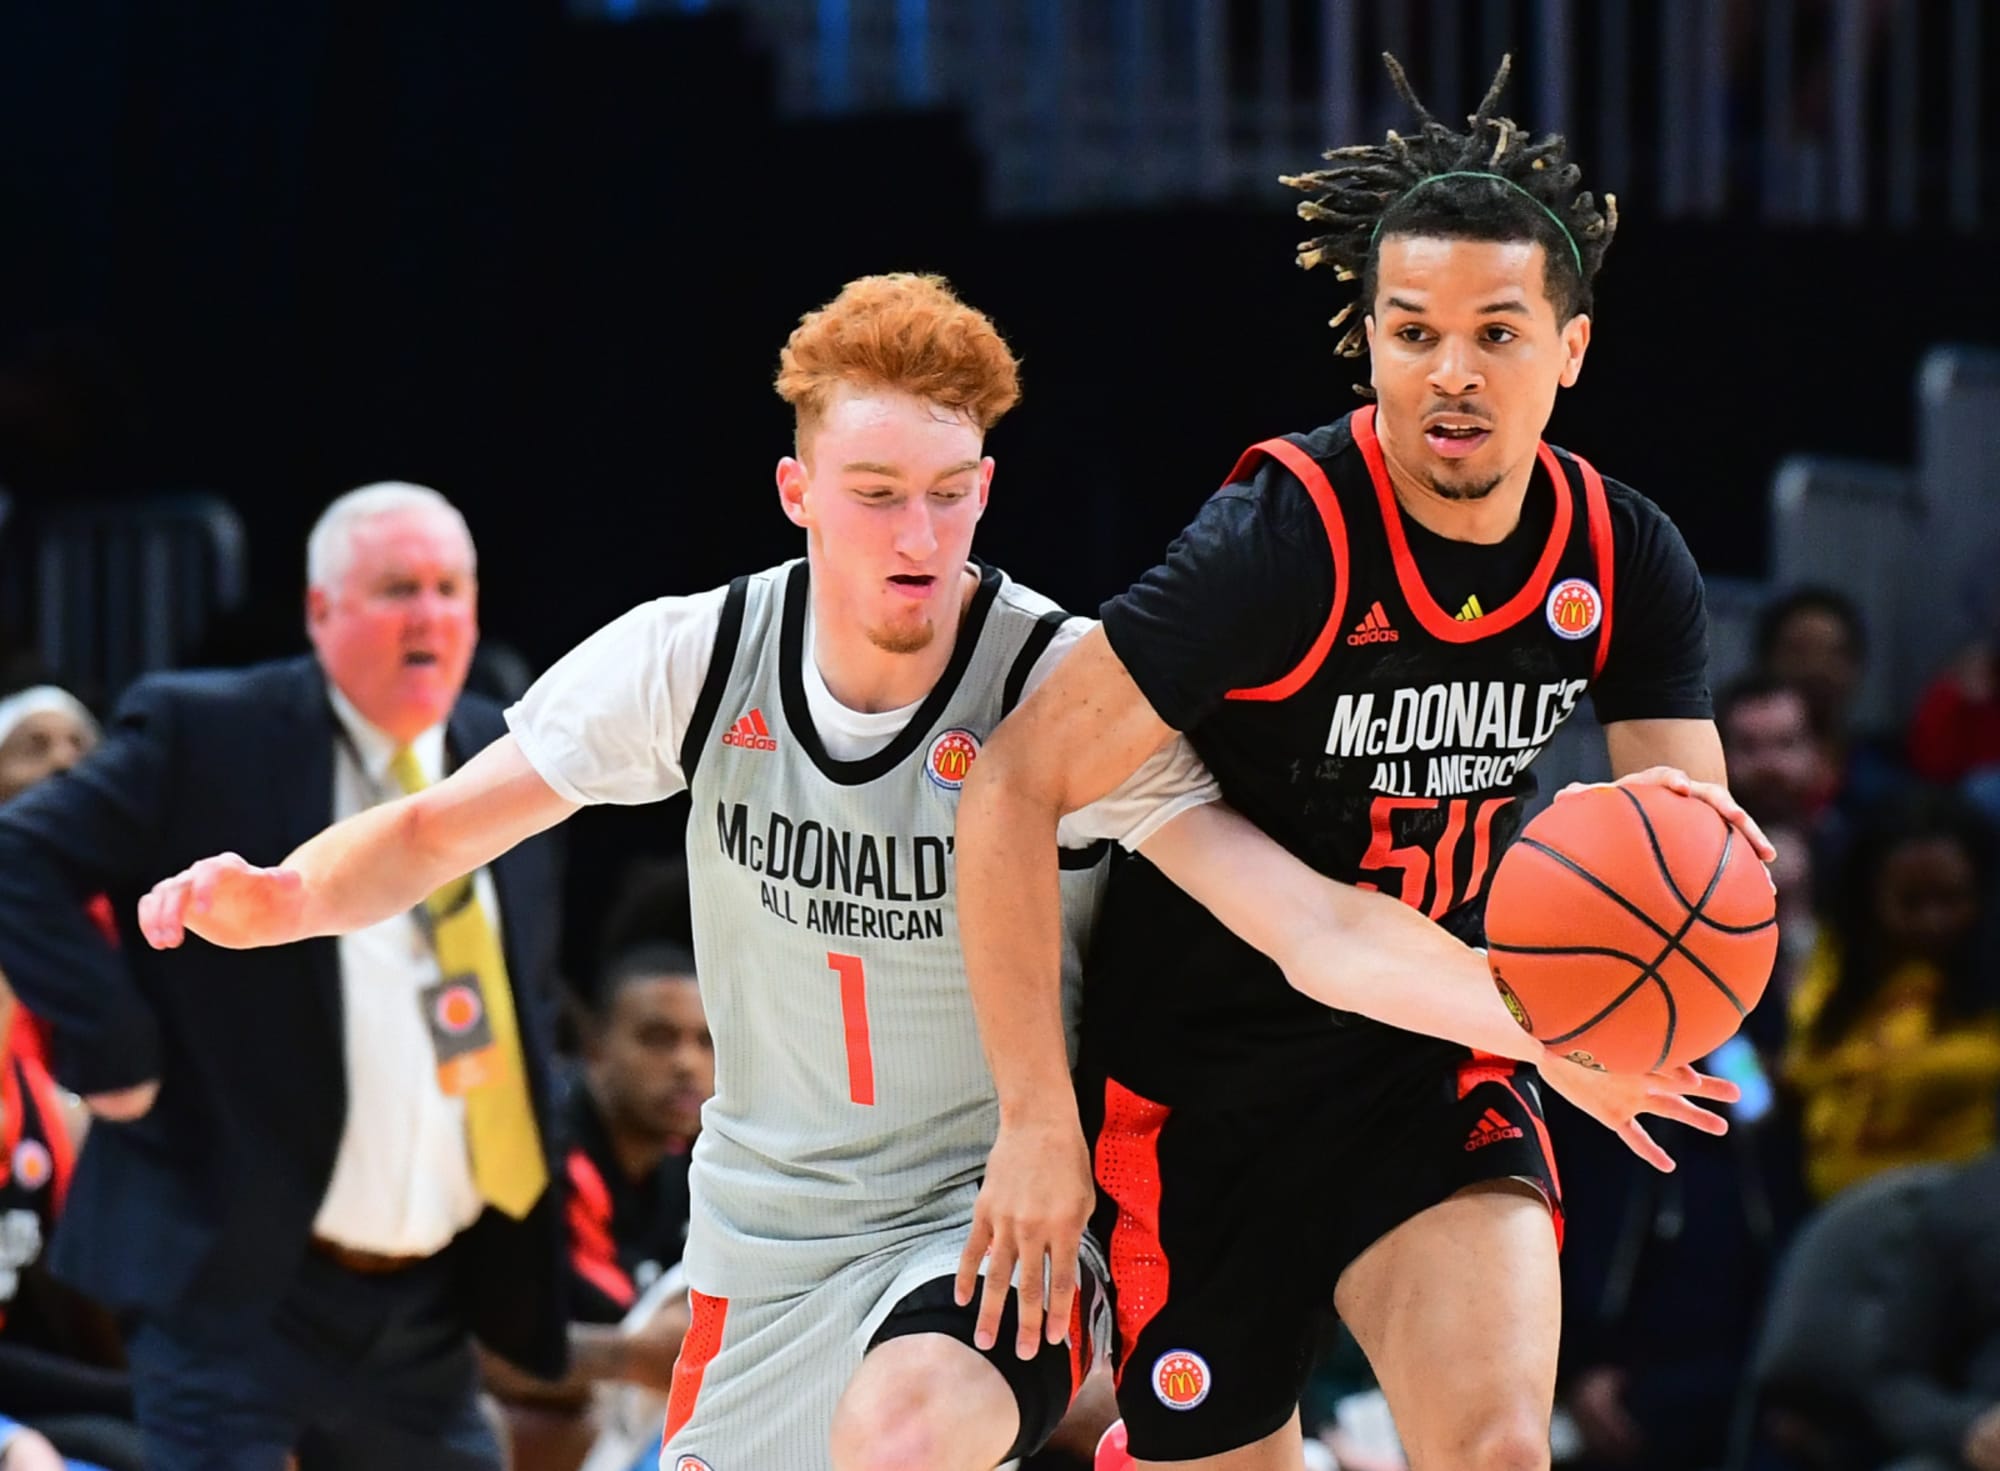 pandilla Hacer Eh Nico Mannion steals the show at the Nike Hoops Summit